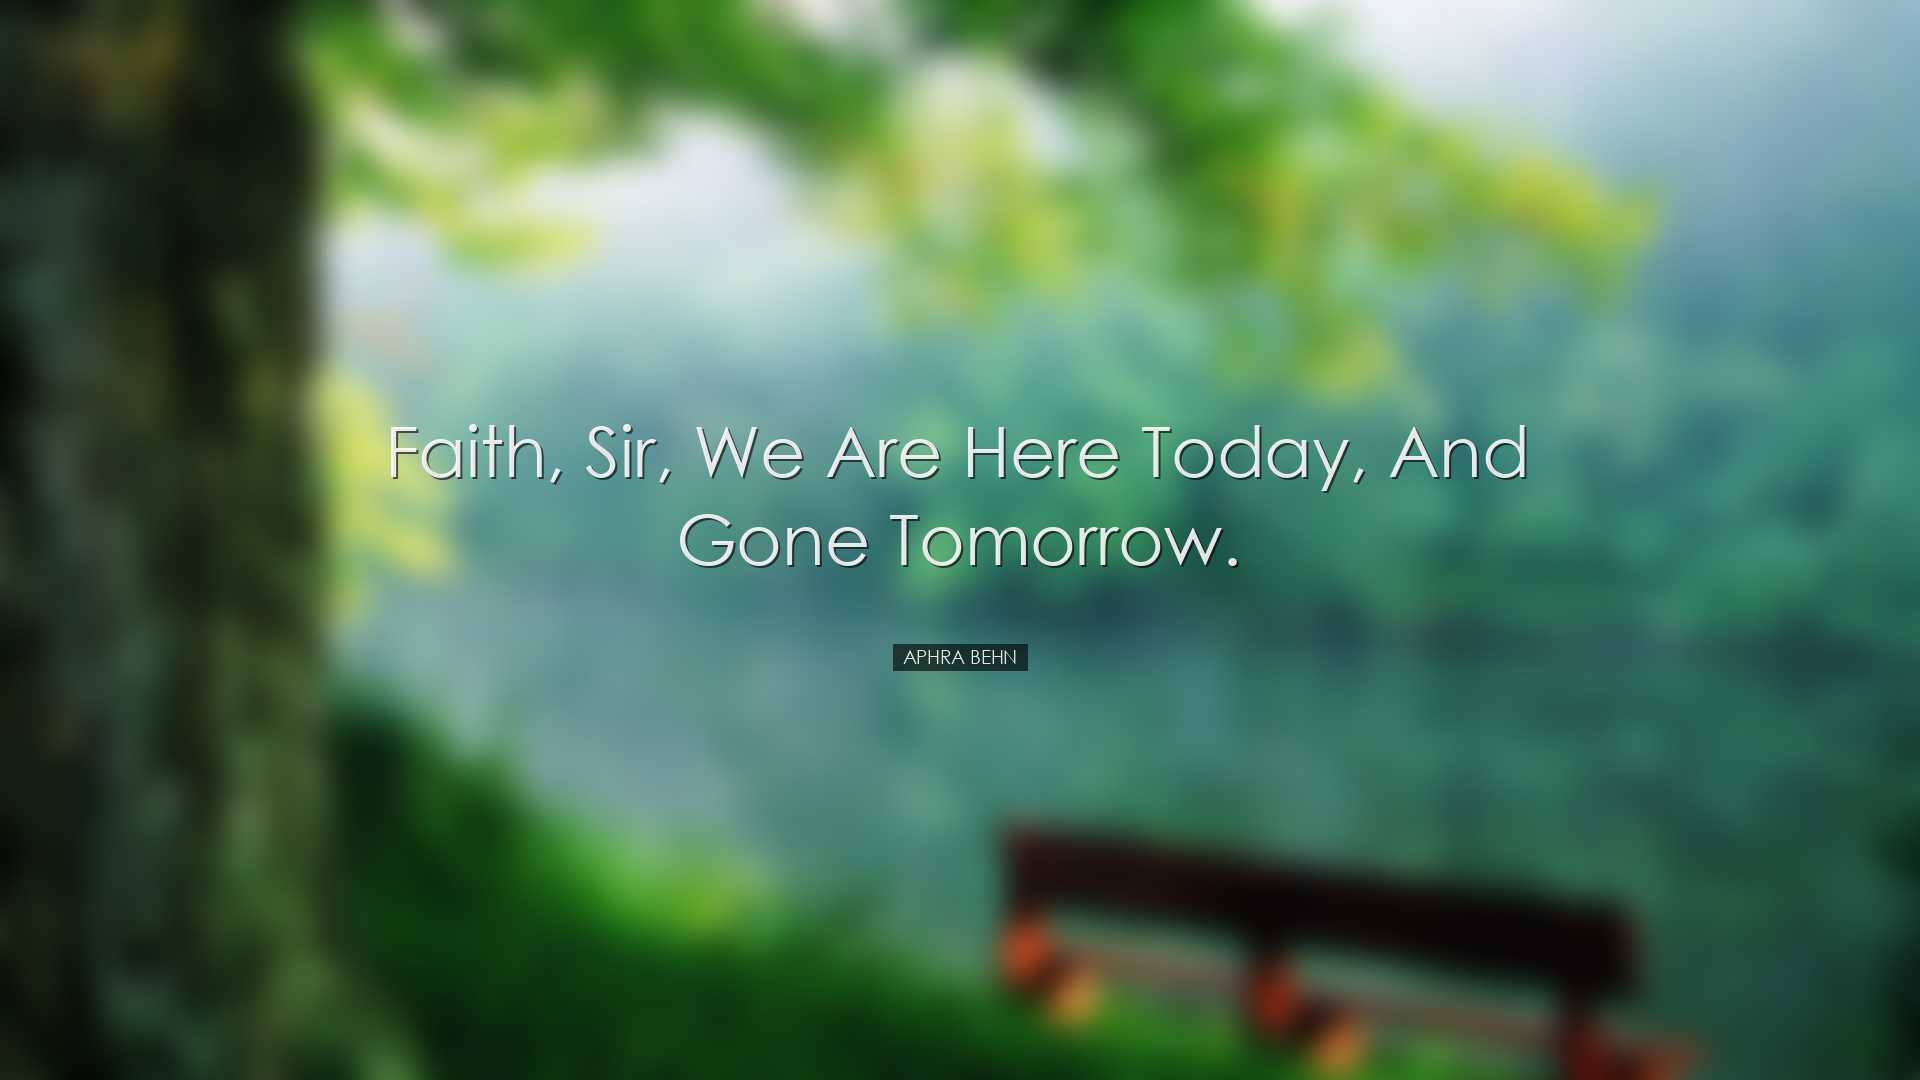 Faith, sir, we are here today, and gone tomorrow. - Aphra Behn